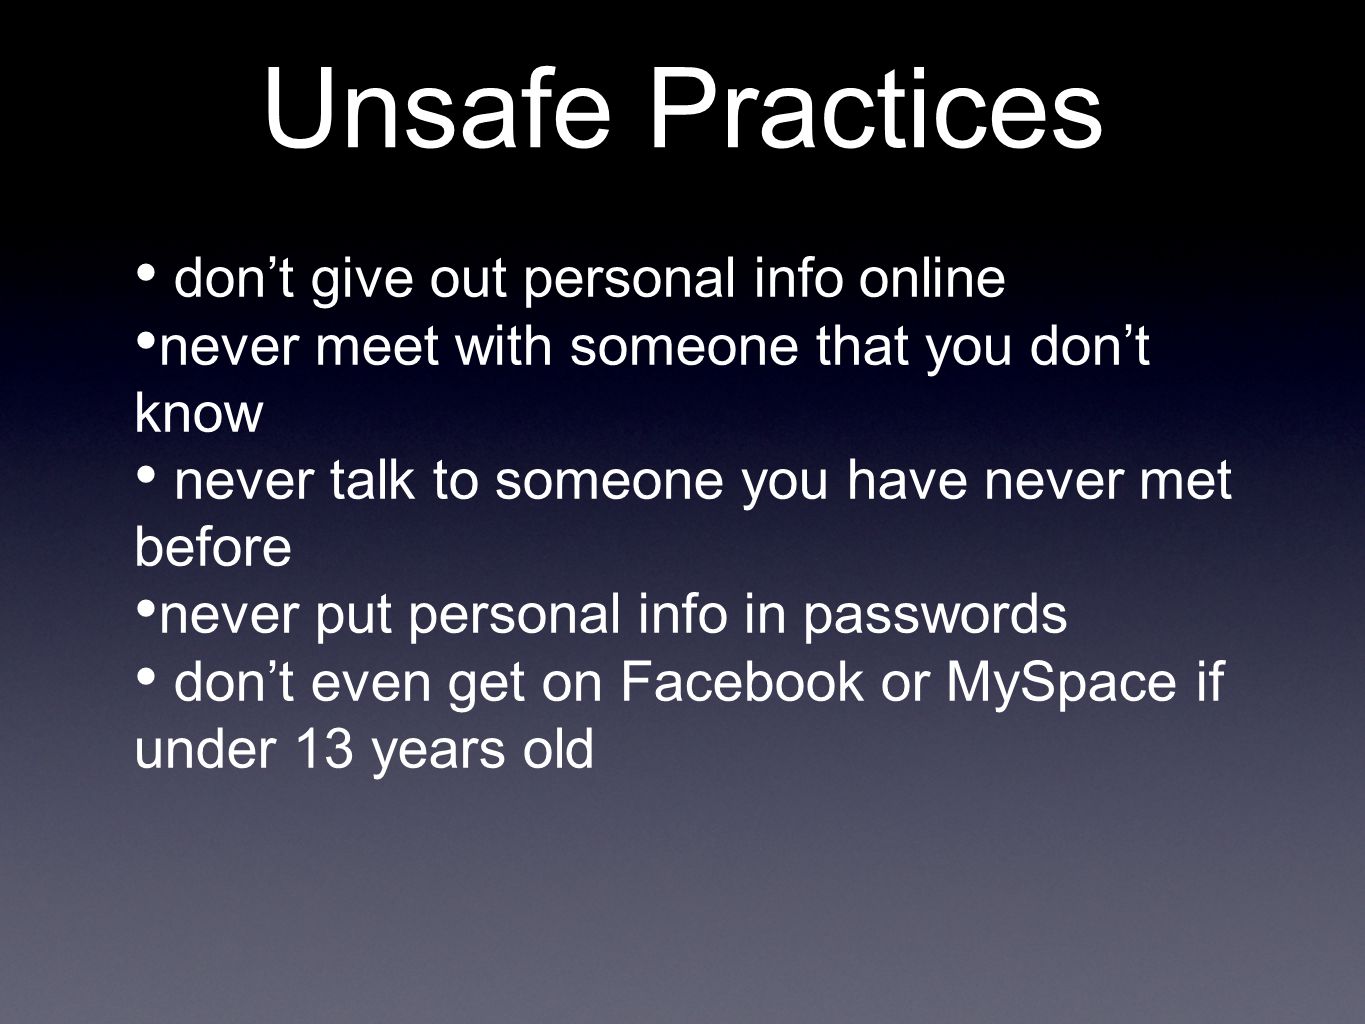 Unsafe Practices don’t give out personal info online never meet with someone that you don’t know never talk to someone you have never met before never put personal info in passwords don’t even get on Facebook or MySpace if under 13 years old